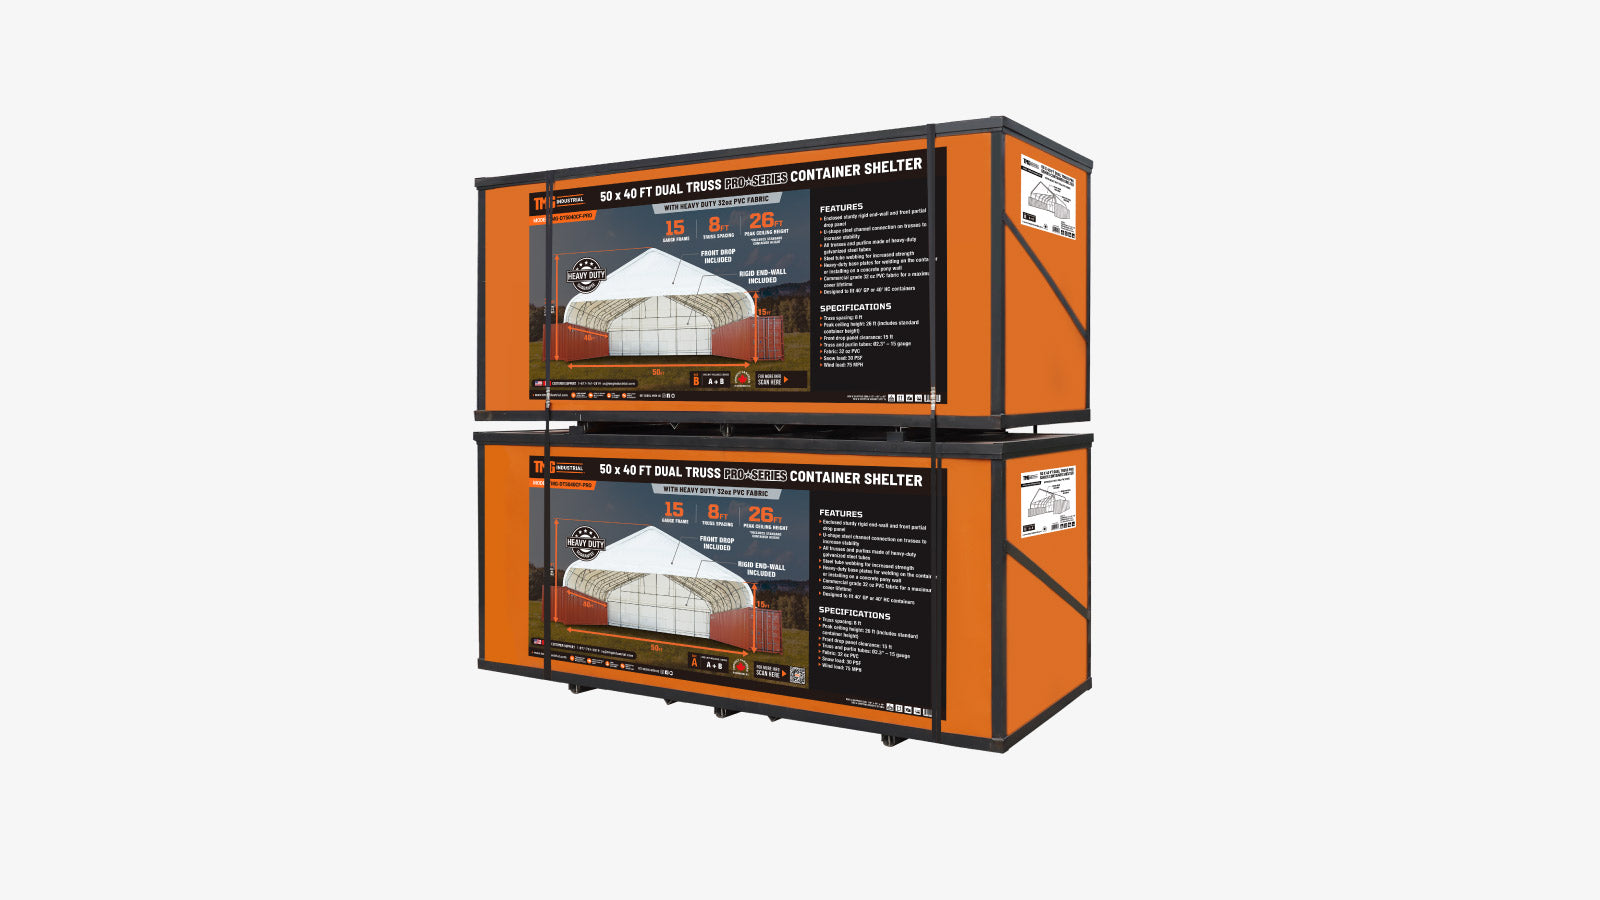 TMG Industrial Pro Series 50' x 40' Dual Truss Container Shelter with Heavy Duty 32 oz PVC Cover, Enclosed End Wall and Front Drop, TMG-DT5040CF-PRO-shipping-info-image